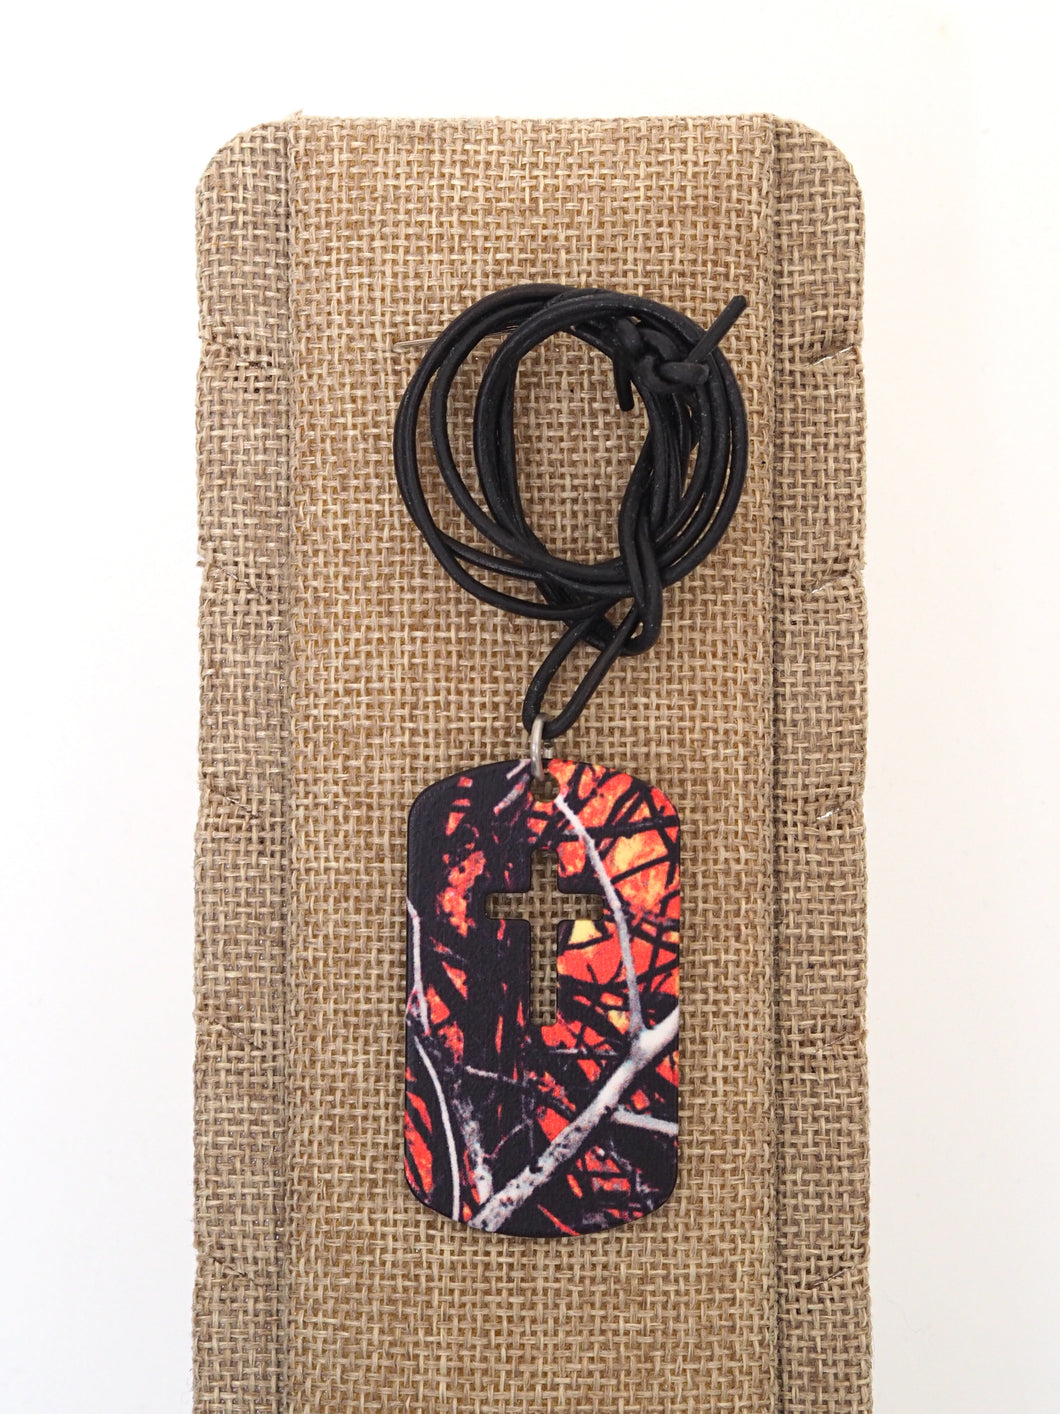 Muddy Girl Wildfire Cross Dog Tag Necklace